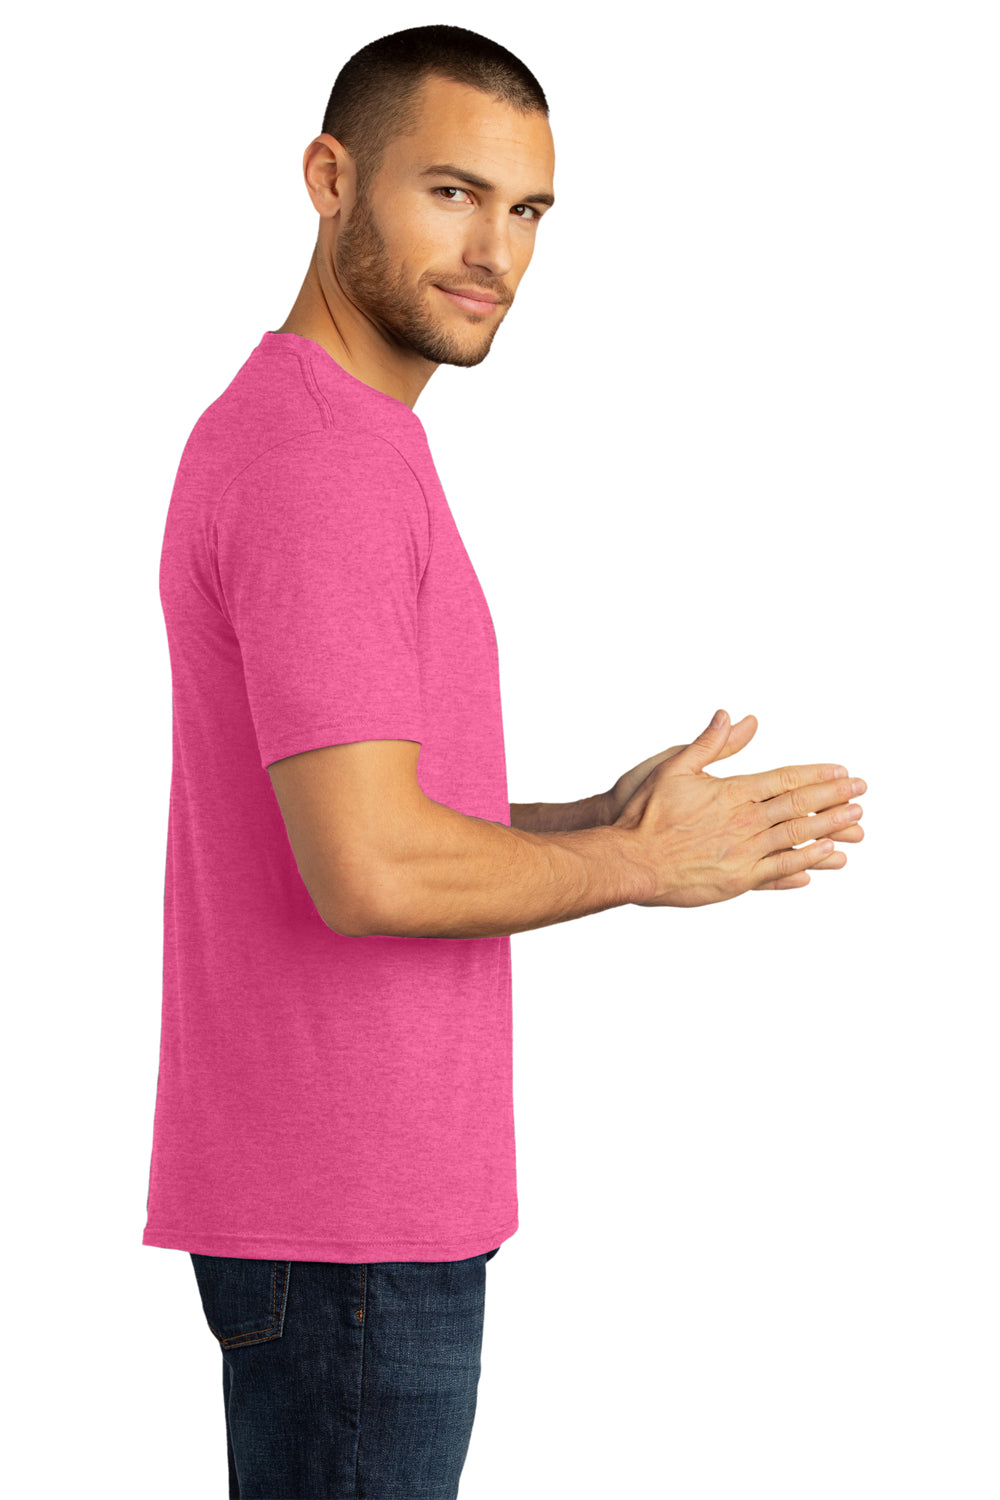 District DM130DTG Mens Perfect DTG Short Sleeve Crewneck T-Shirt Fuchsia Pink Frost Side